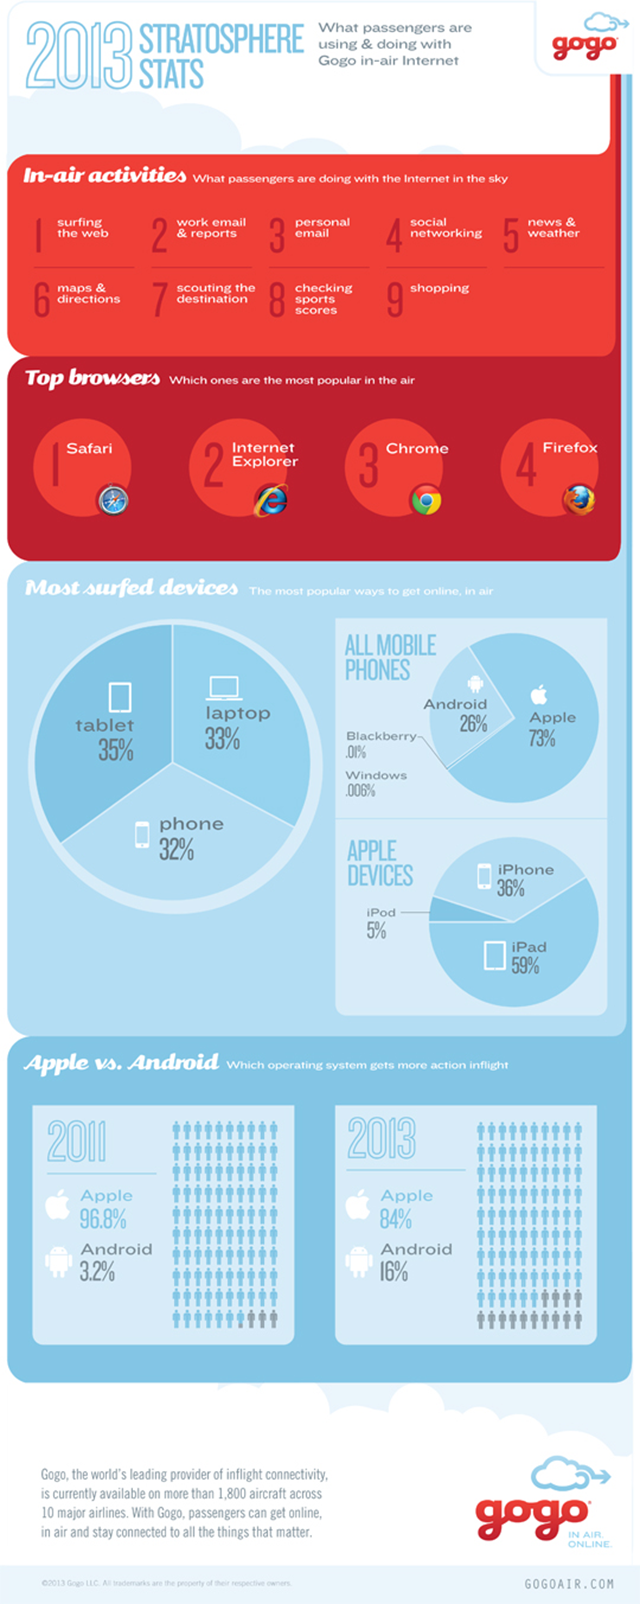 iOS Accounts for 84% of Gogo Mobile Internet Traffic [Infographic]